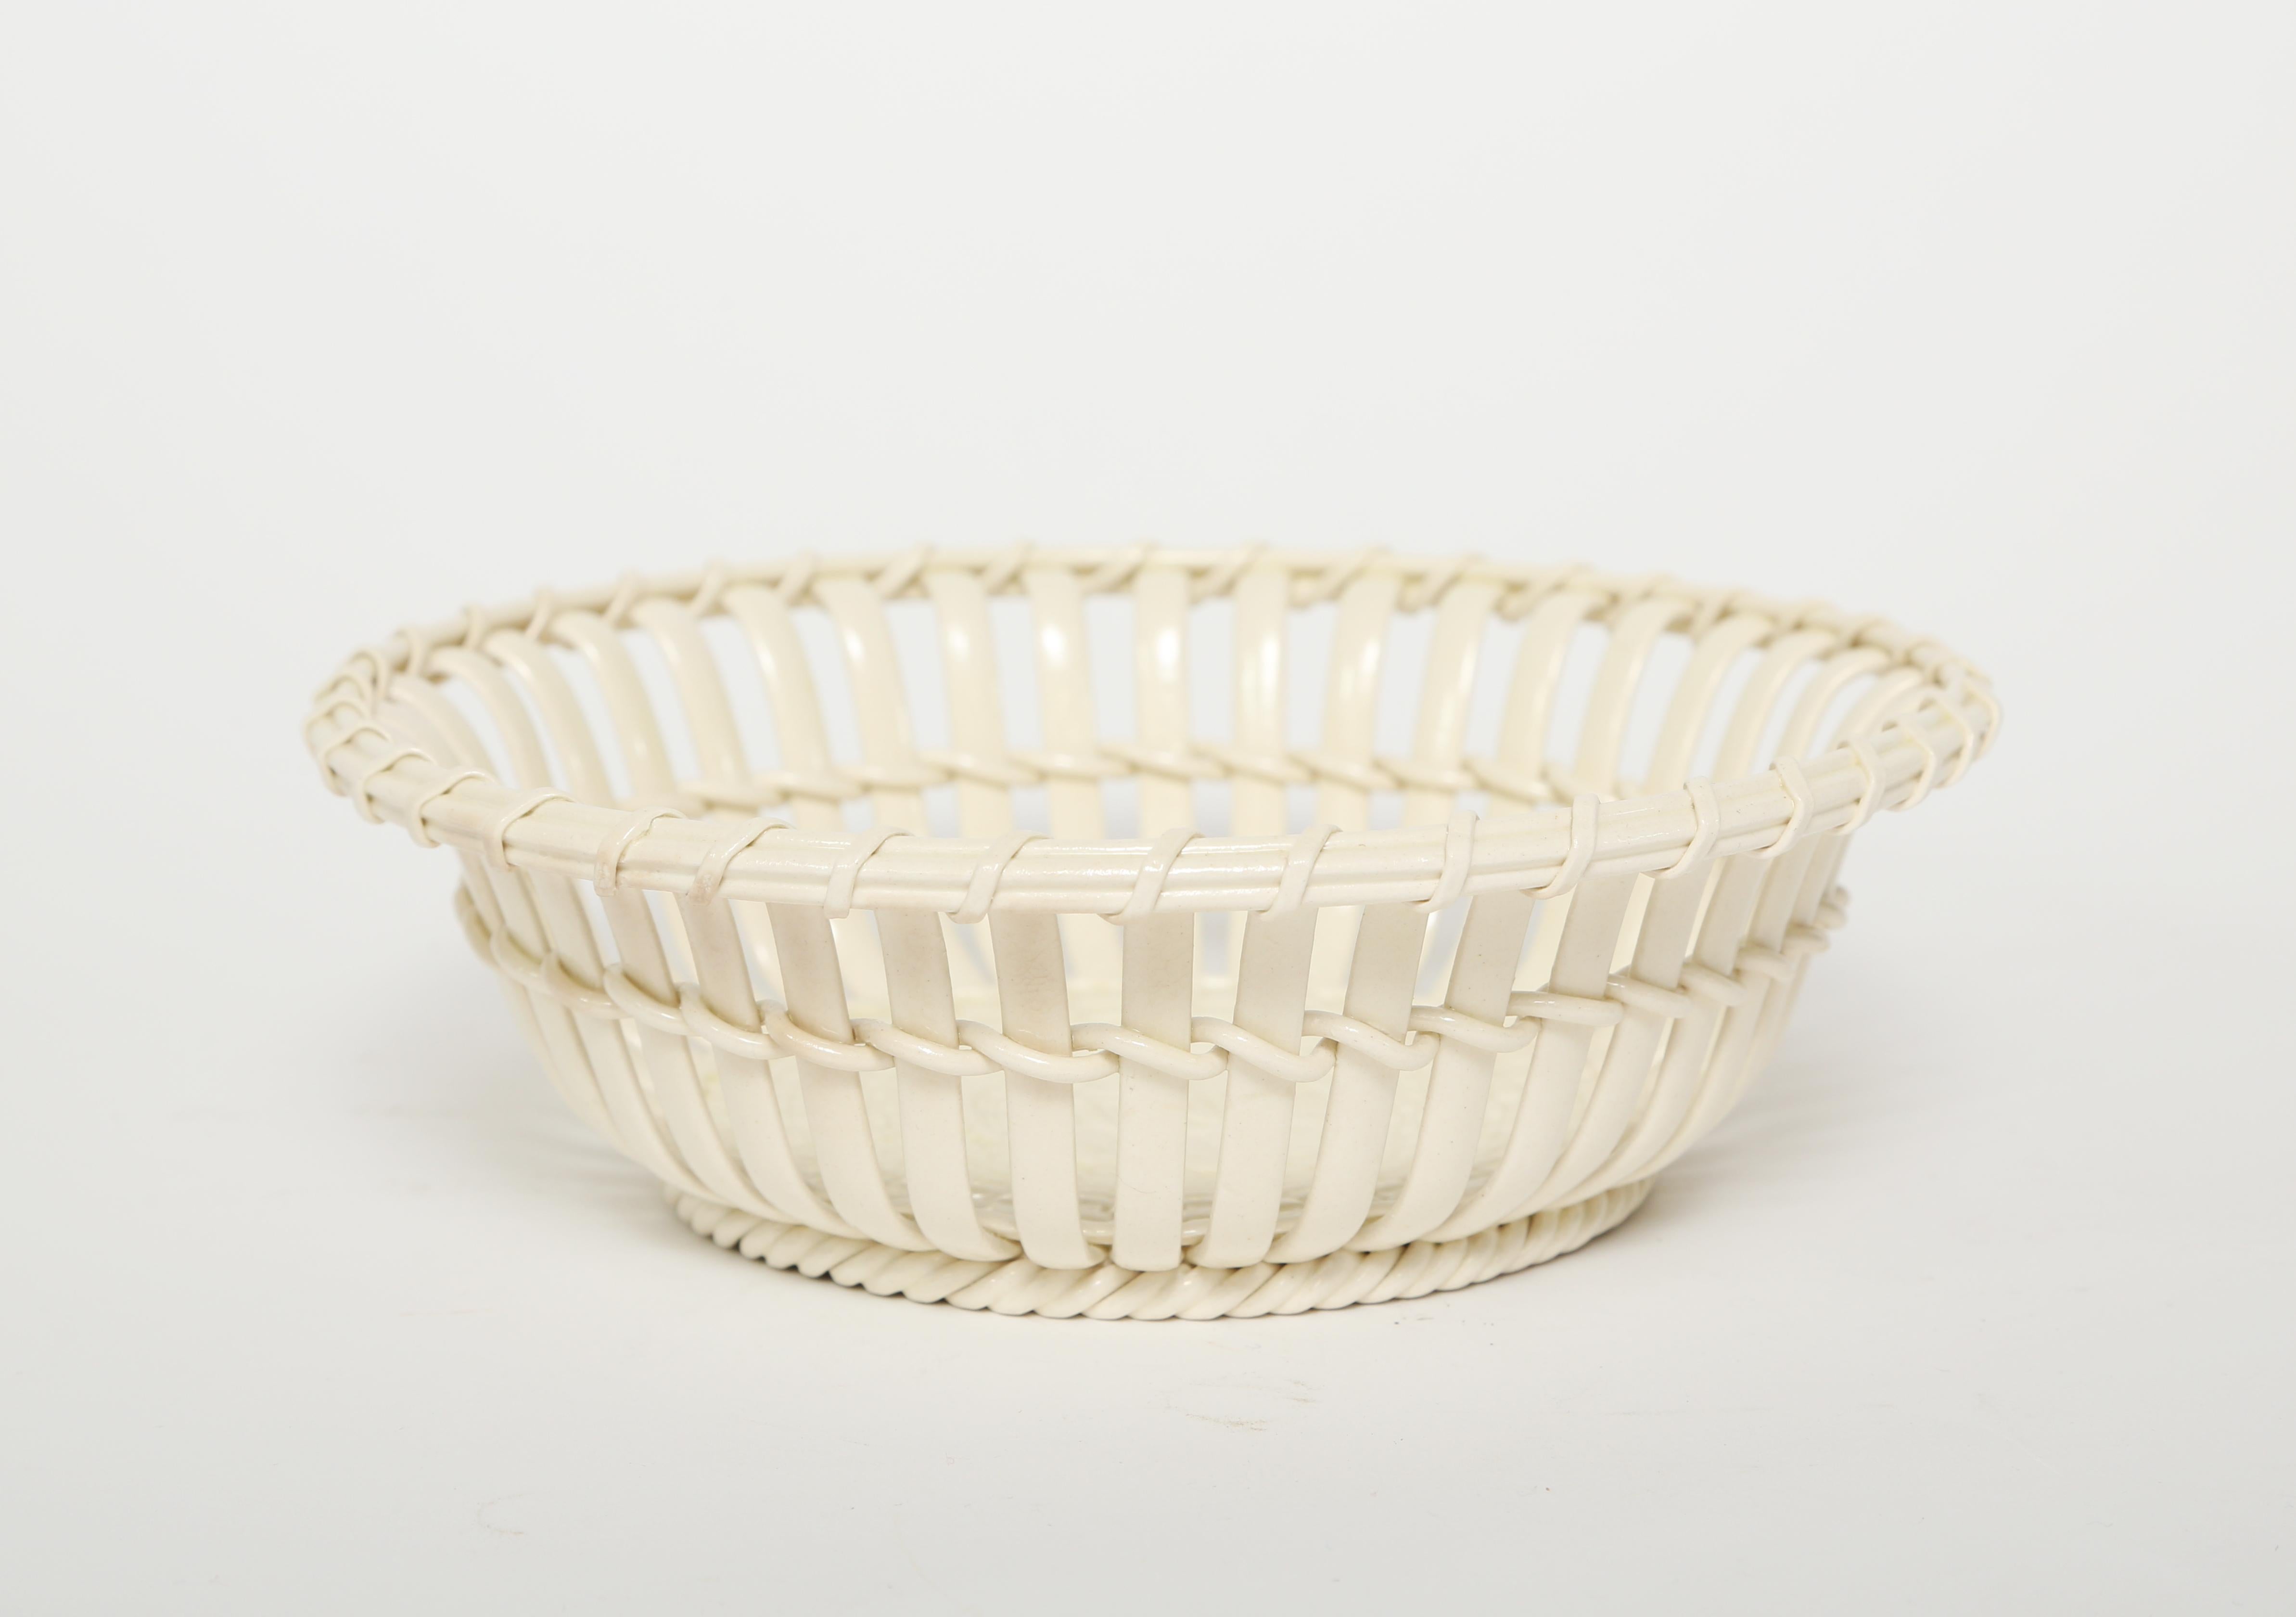 Antique Wedgwood creamware chestnut basket in very good condition.  This basket for today's use would be great filled with cherries, strawberries or grapes.  There are no chips or cracks.
Diameter 7.25